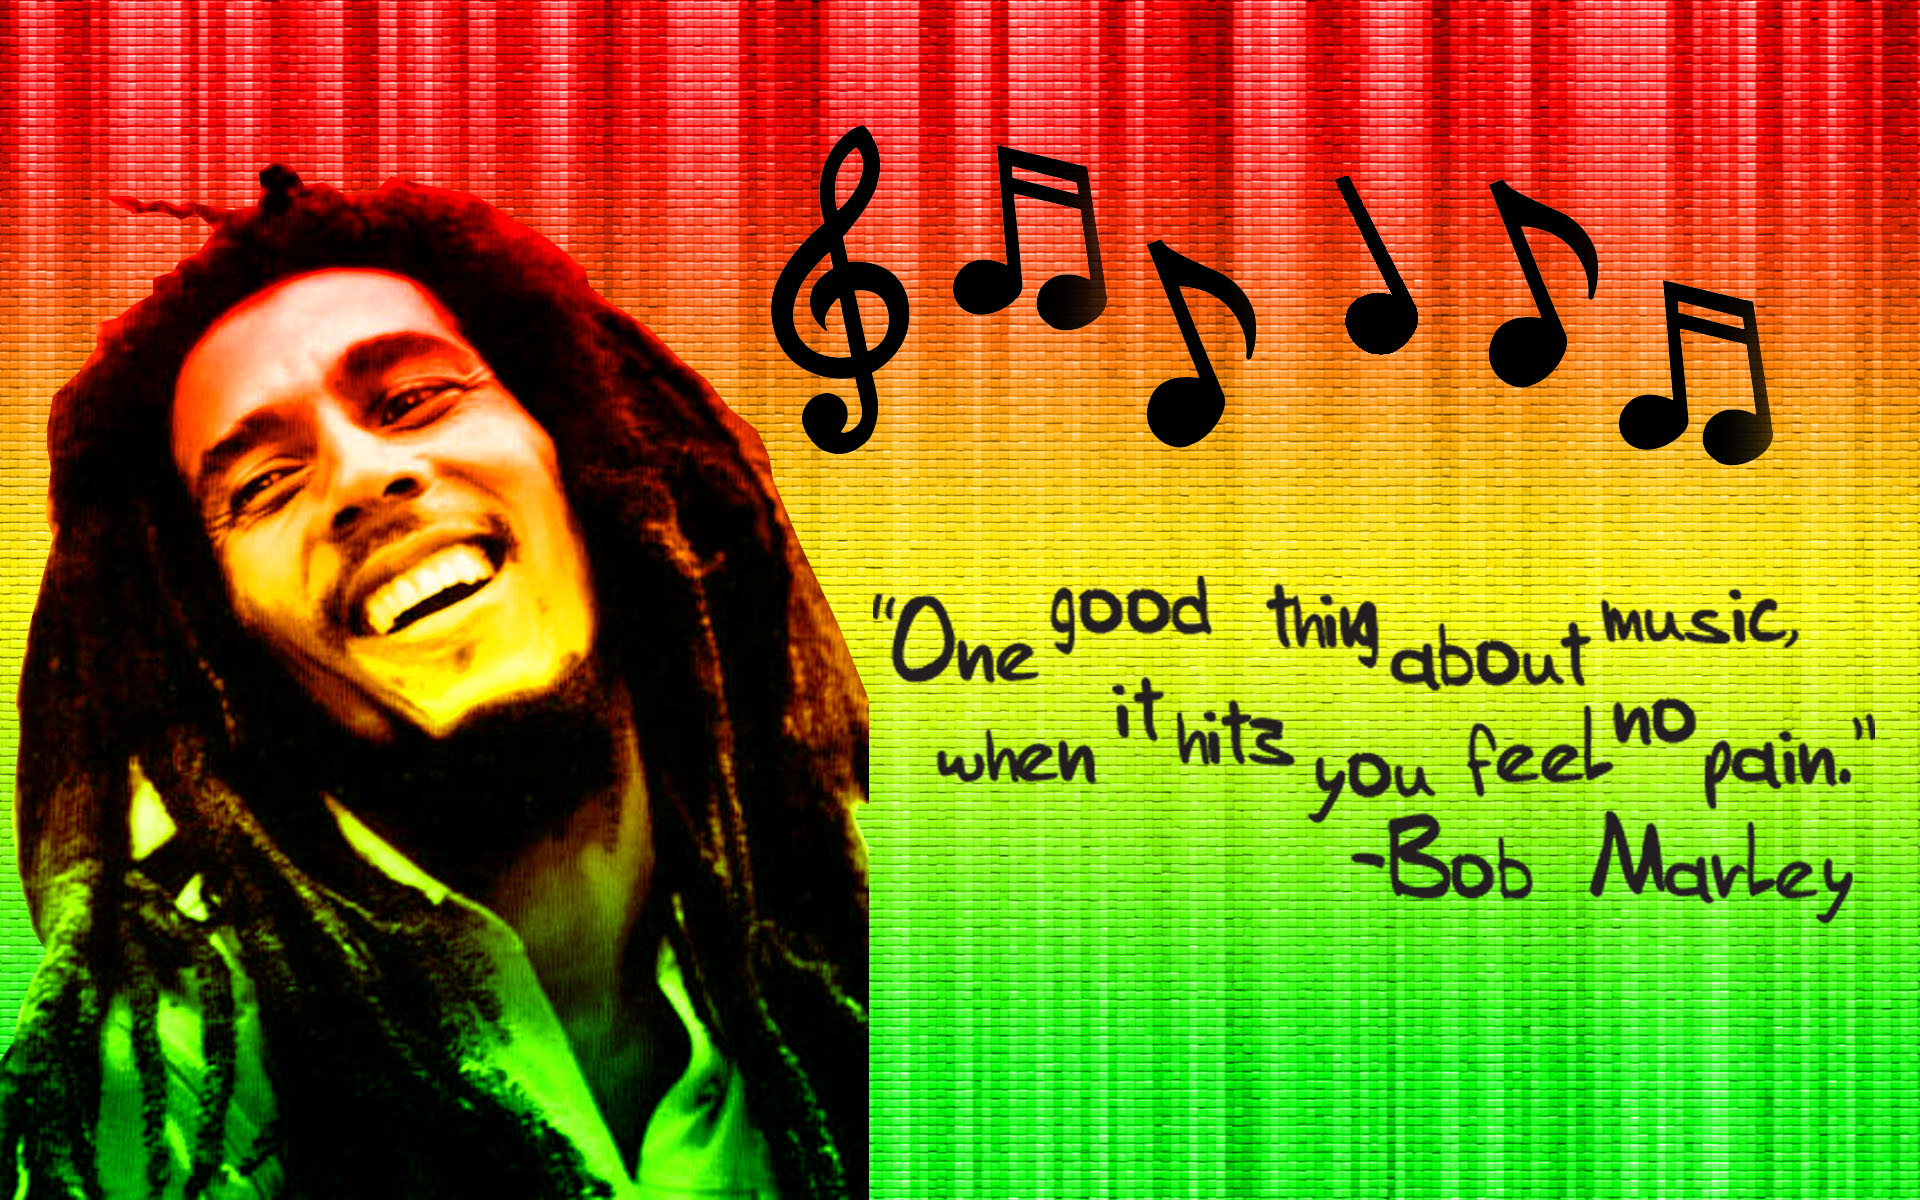 Bob Marley In High Resolution For Get And